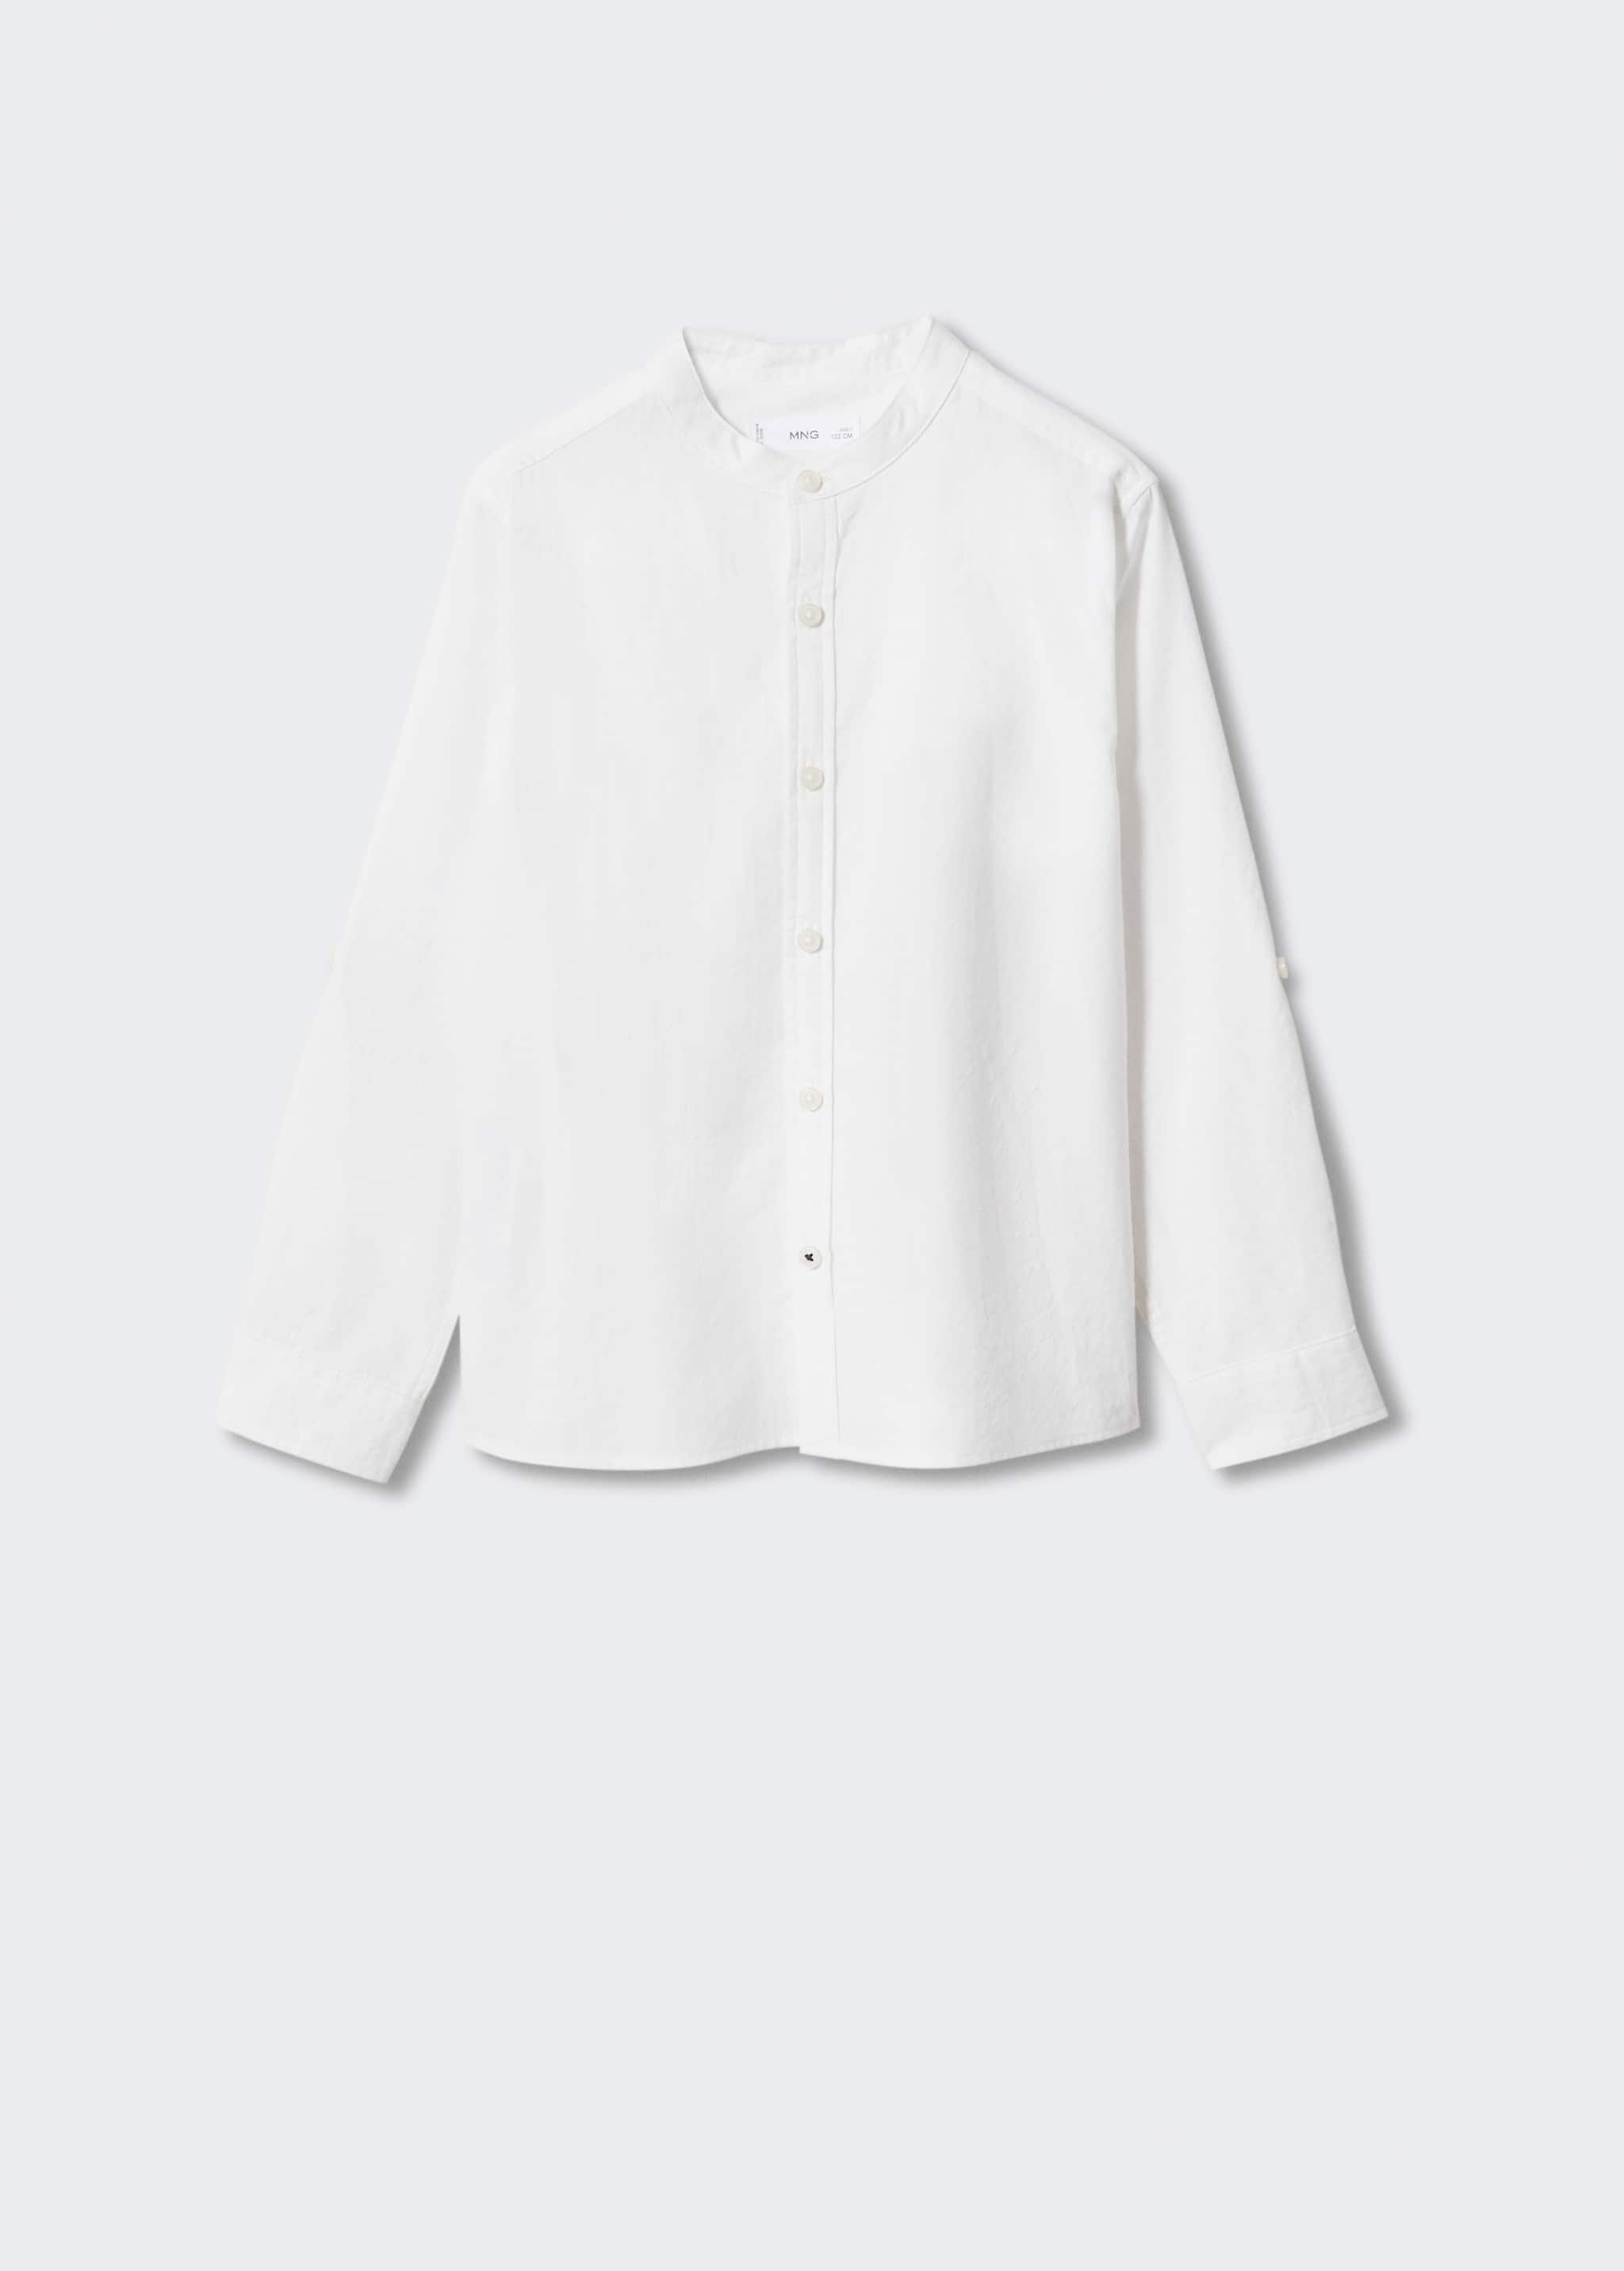 Mao collar shirt - Article without model